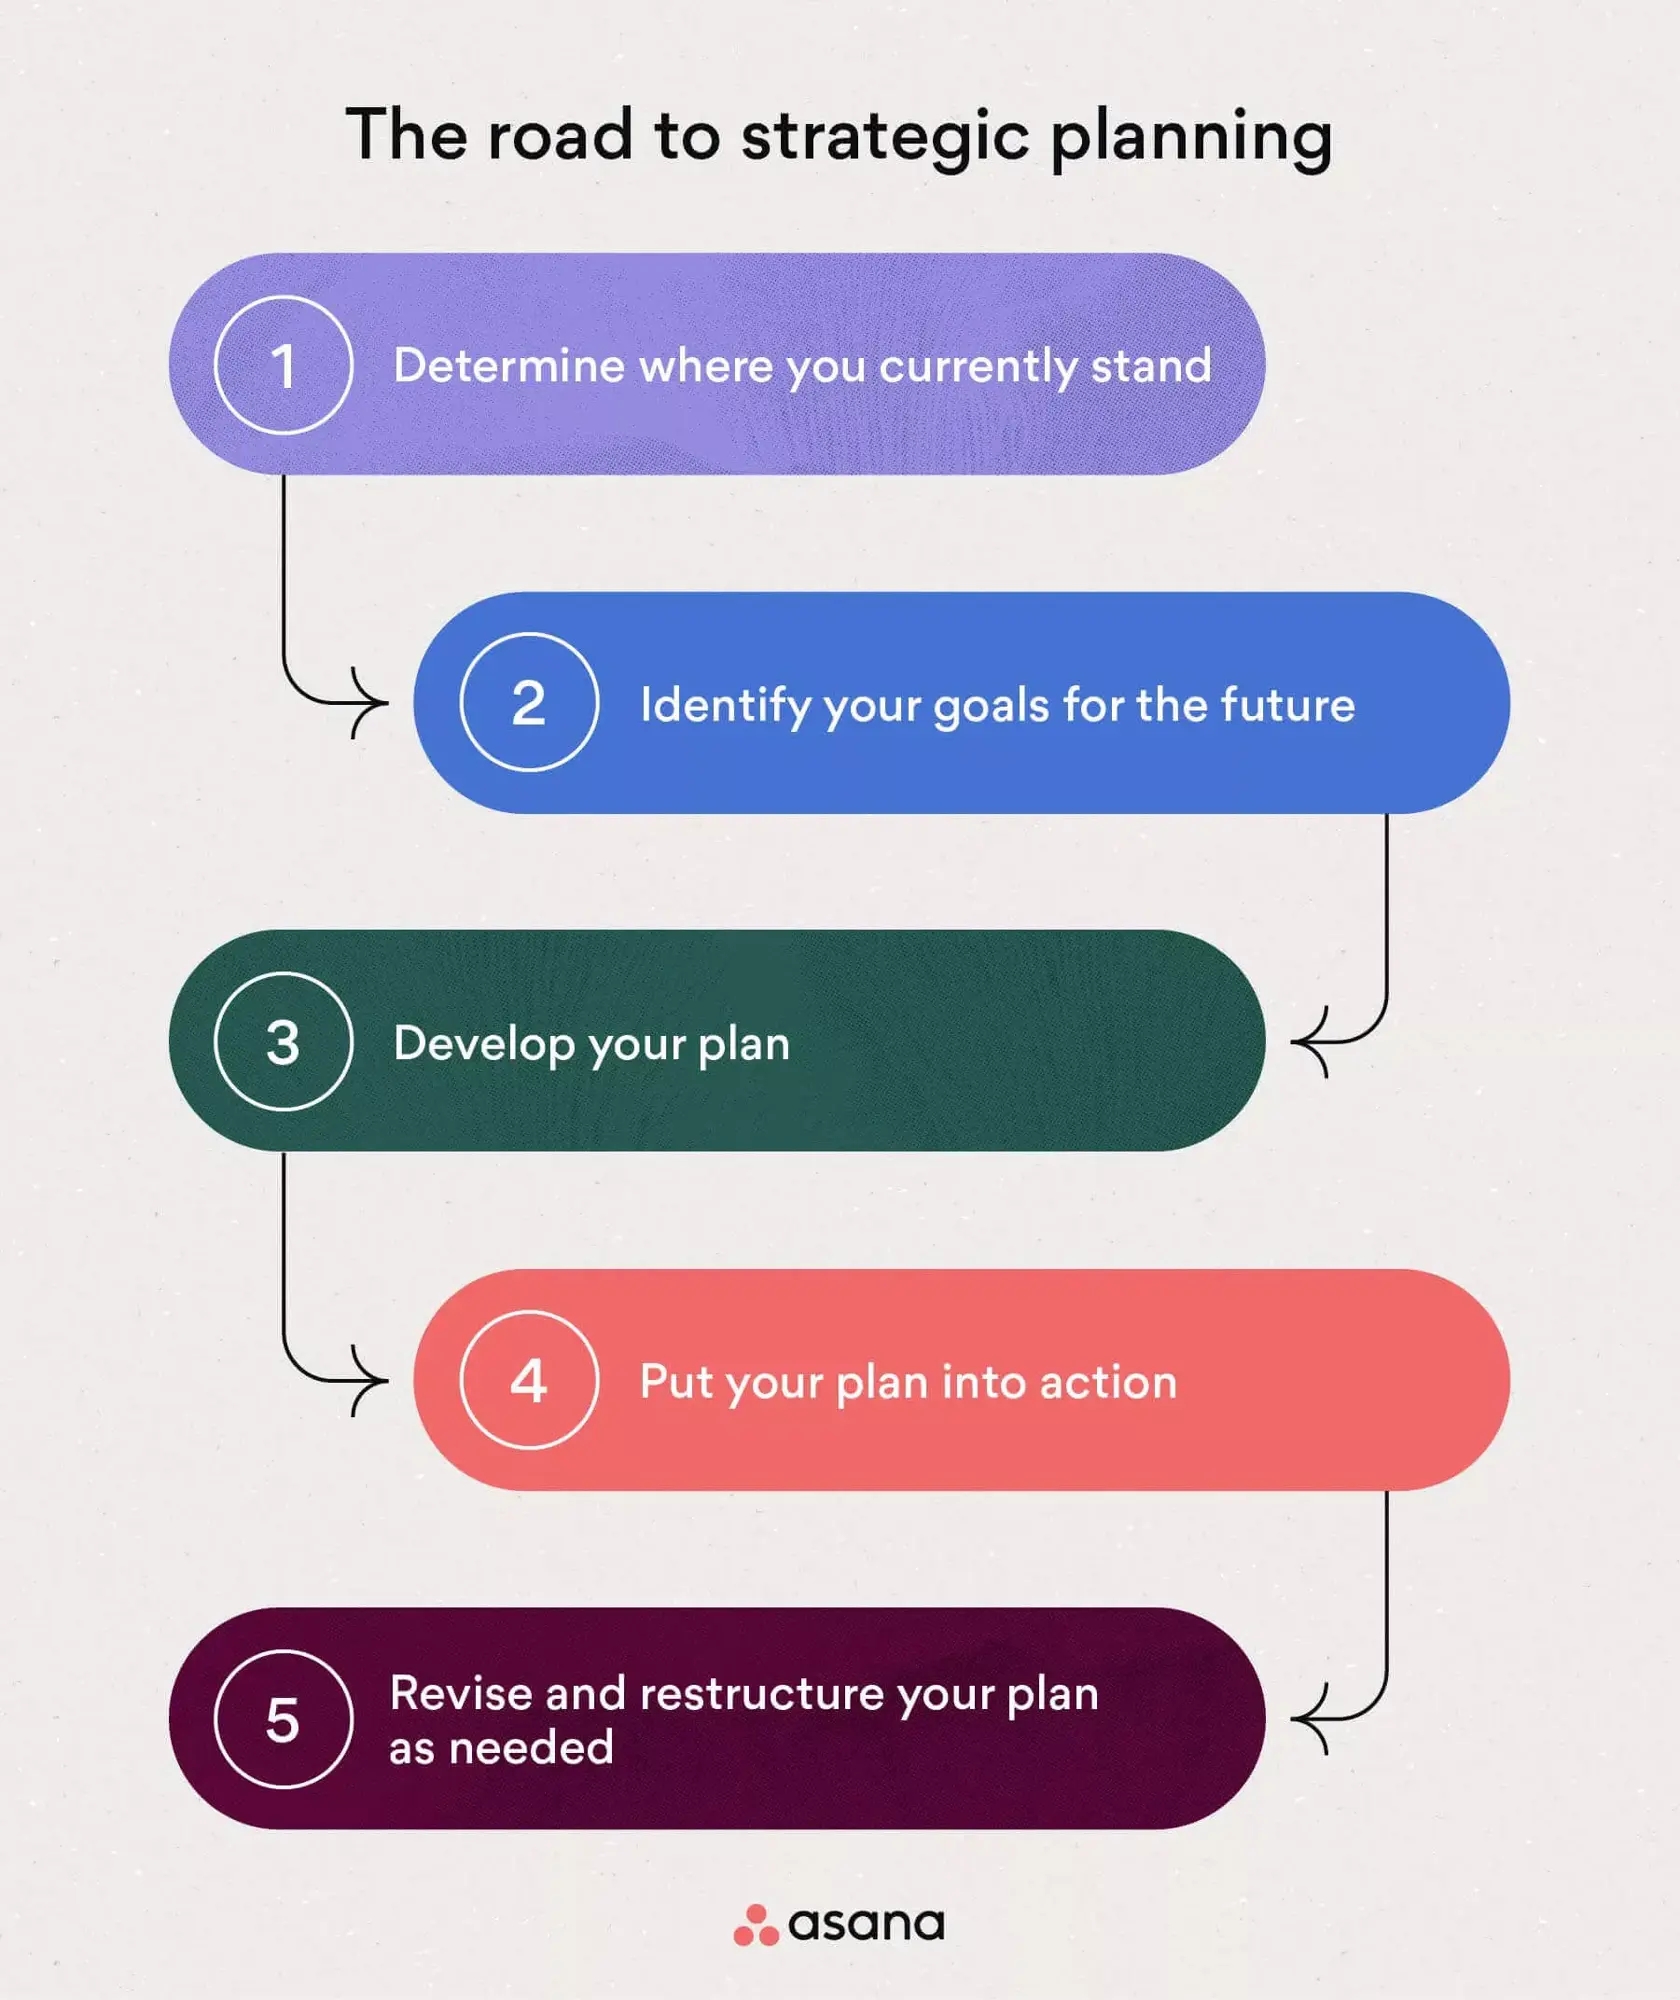 [inline illustration] The road to strategic planning (infographic)